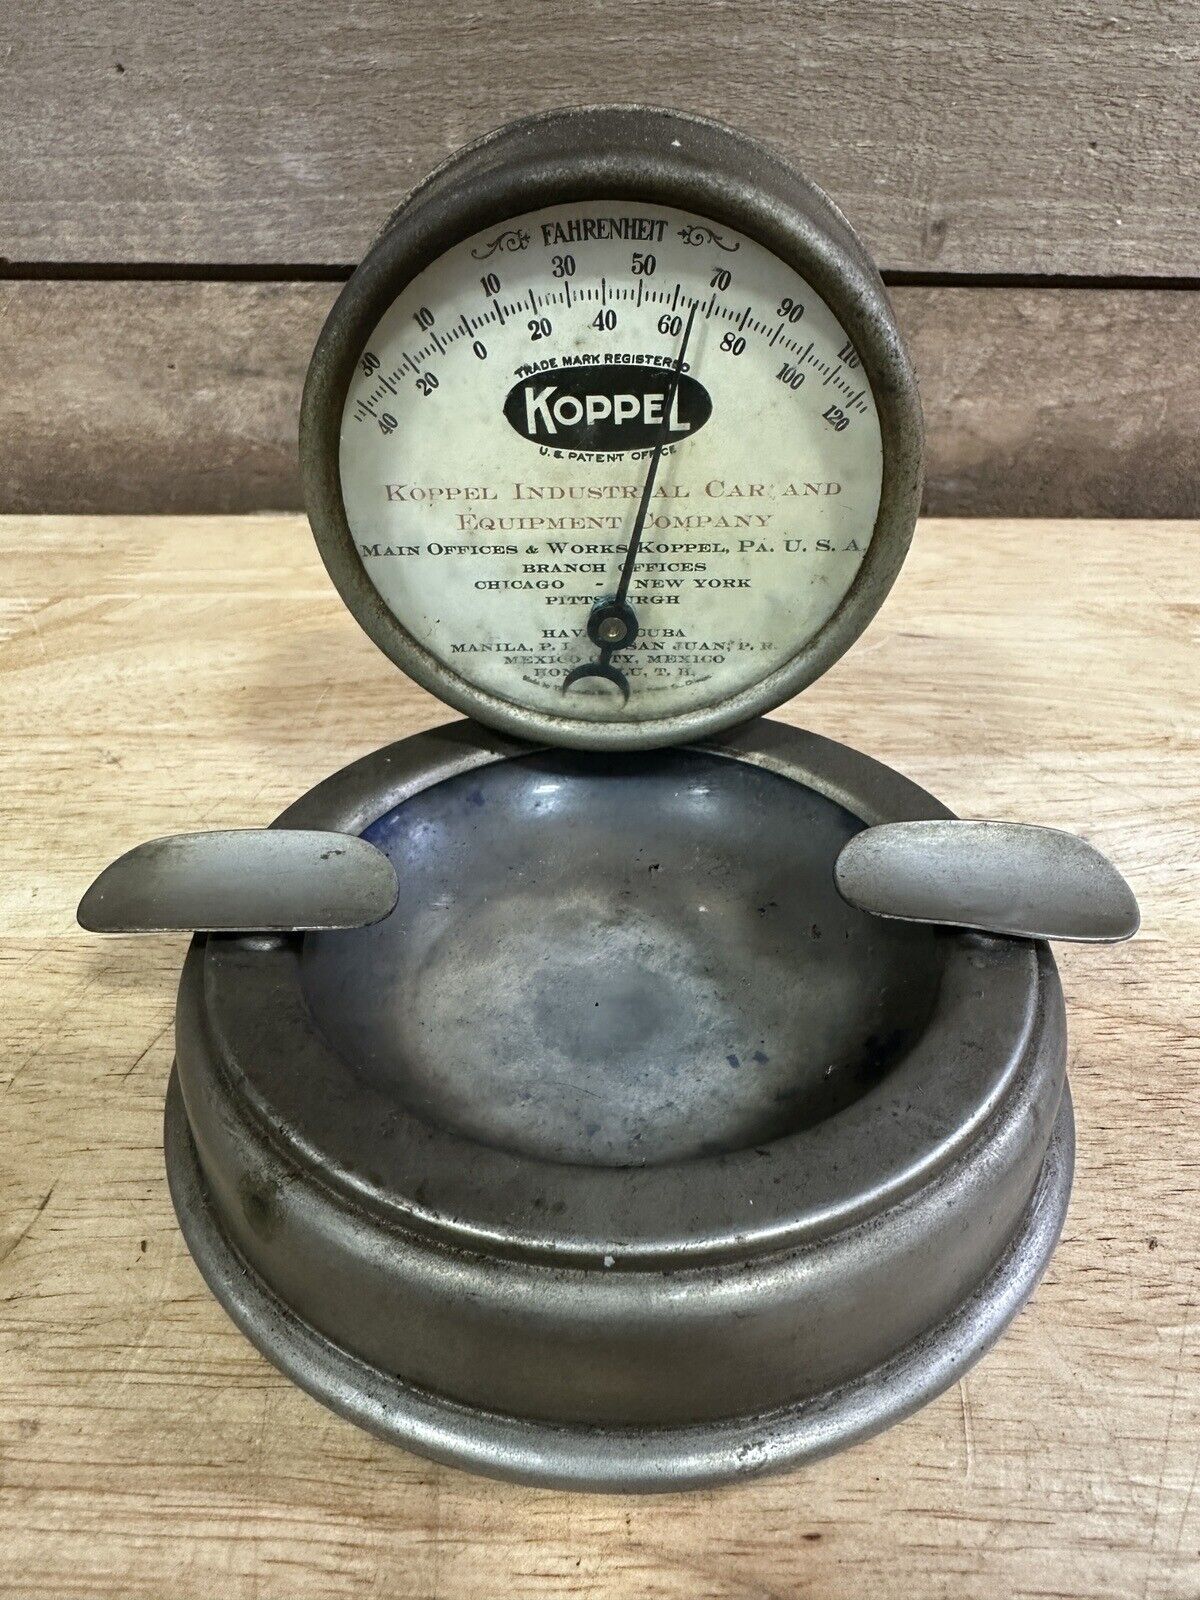 Vintage Koppel Industrial Car And Equipment Company Ash Tray With Thermometer Ad